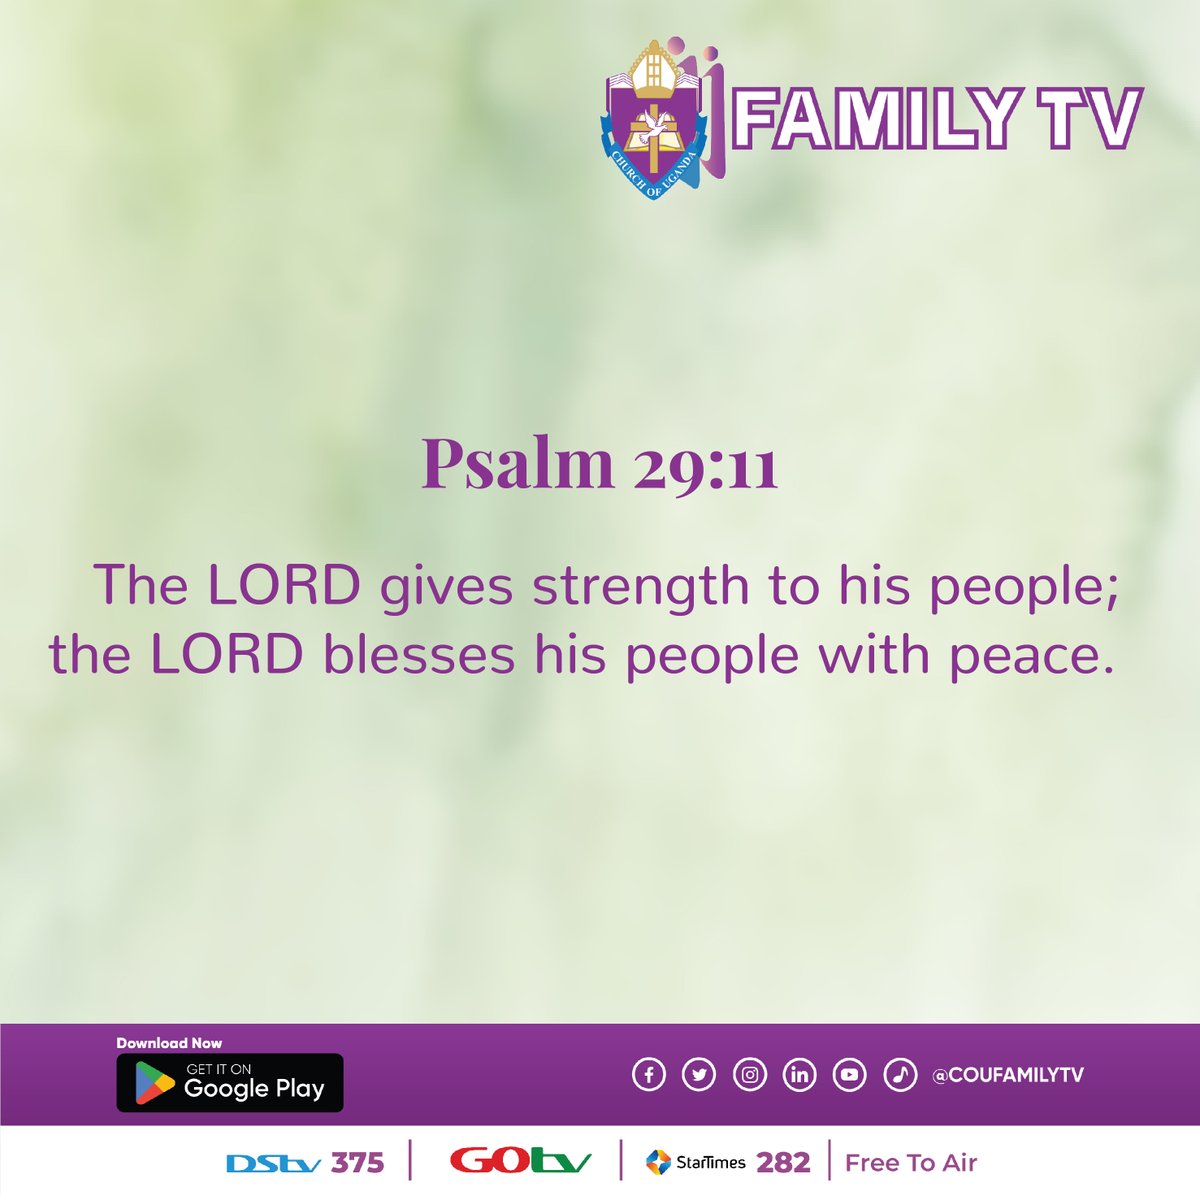 The LORD gives strength to his people; the LORD blesses his people with peace. (Psalm 29:11) NIV
#VerseoftheDay  #enrichinglives